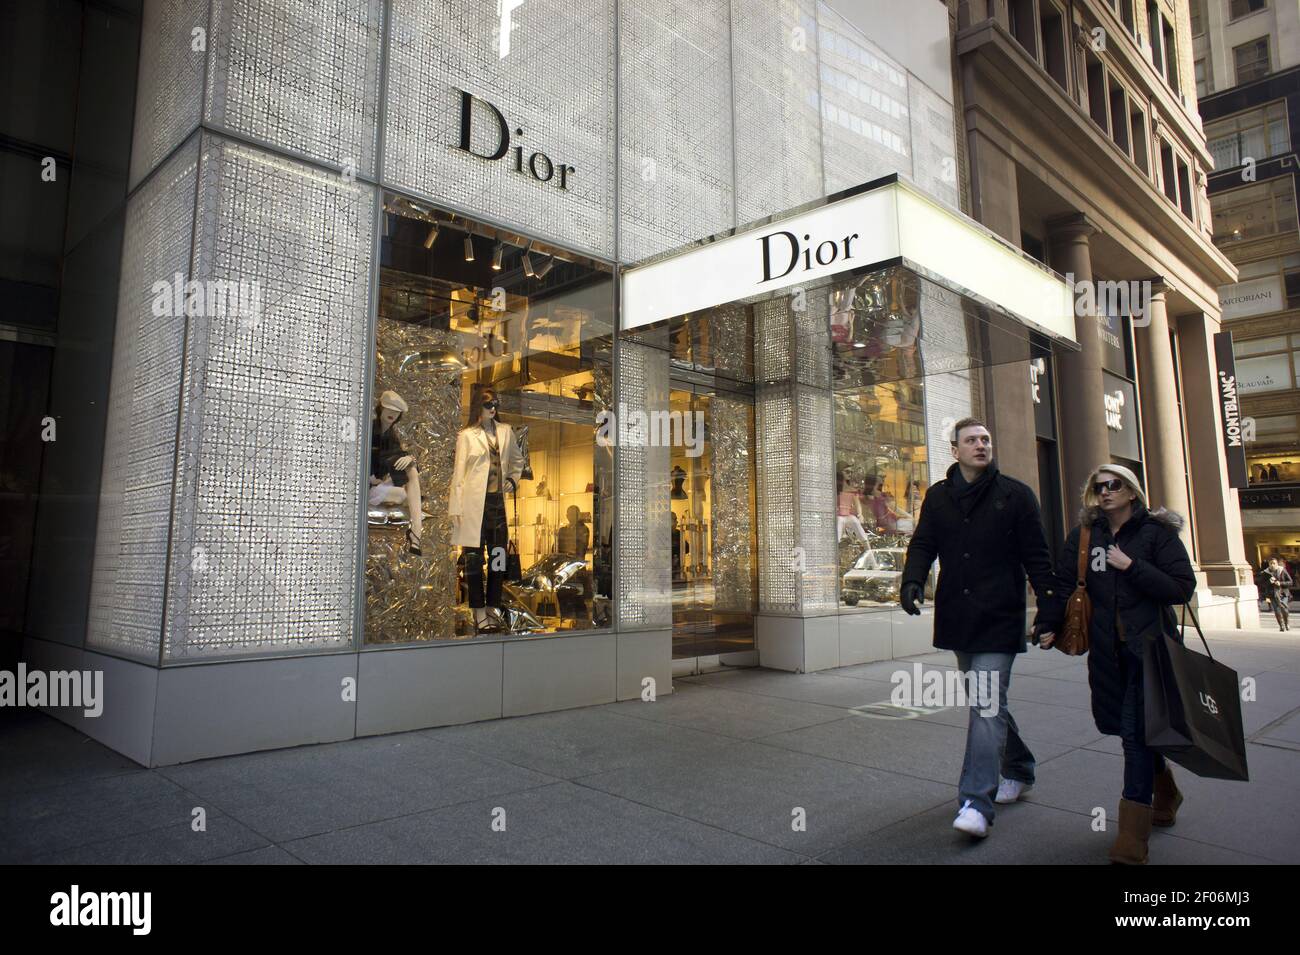 The Christian Dior store on East 57th street off of Fifth Avenue in New  York on Sunday, February 27, 2011. LVMH Moet Hennessy Louis Vuitton  announced that they will take over Christian